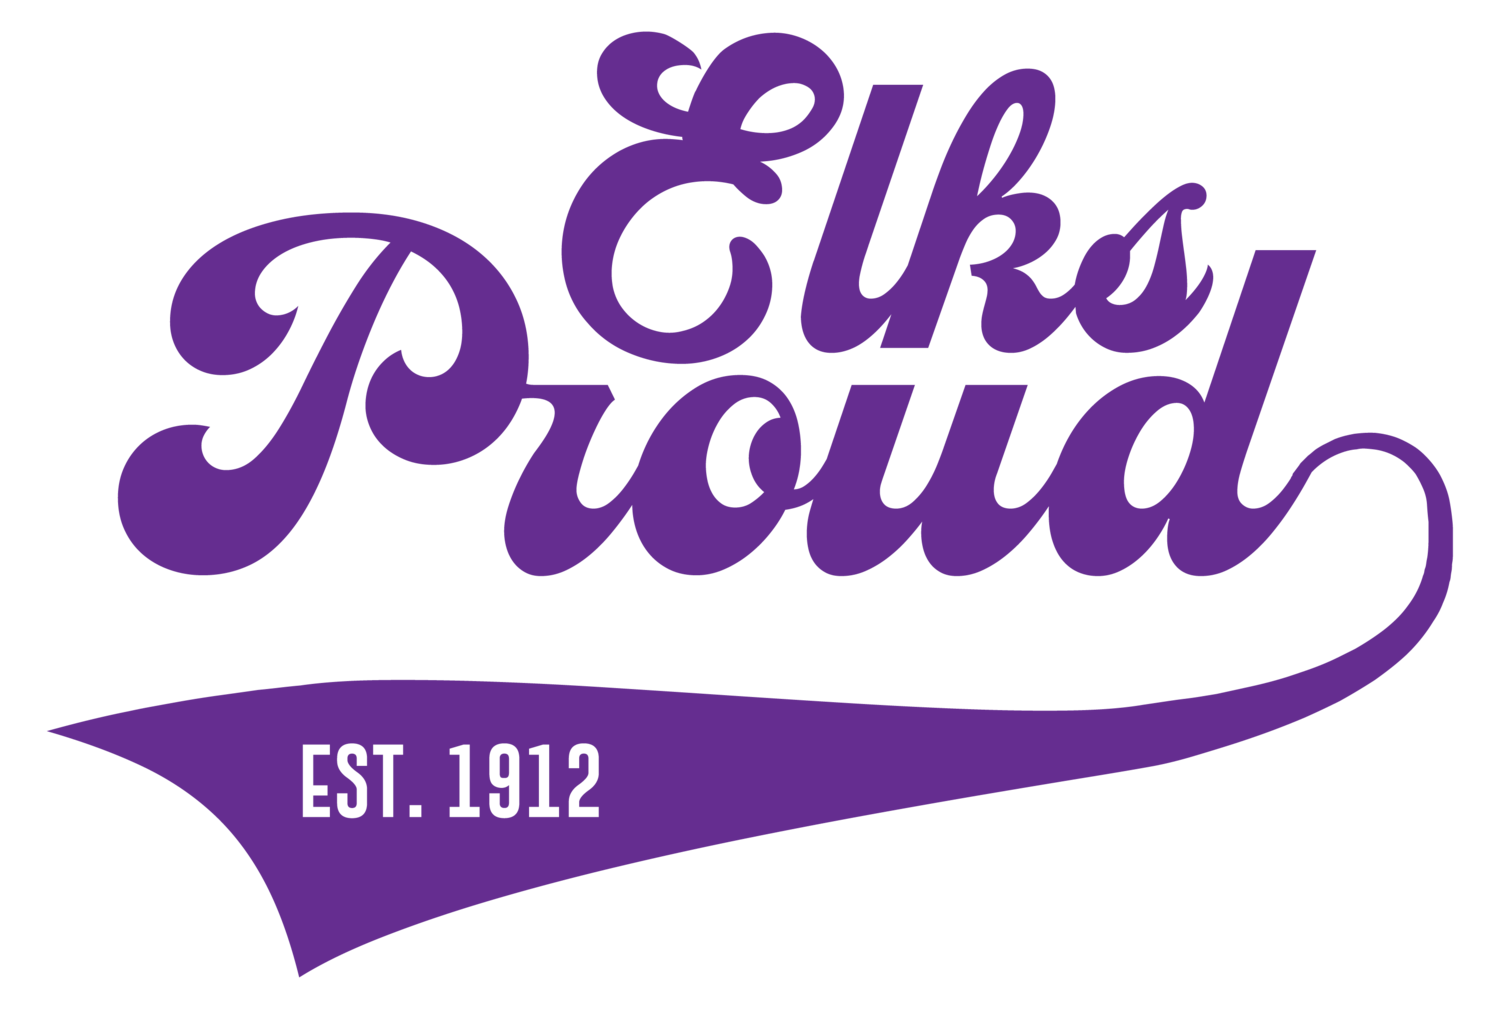 how to join the elks lodge